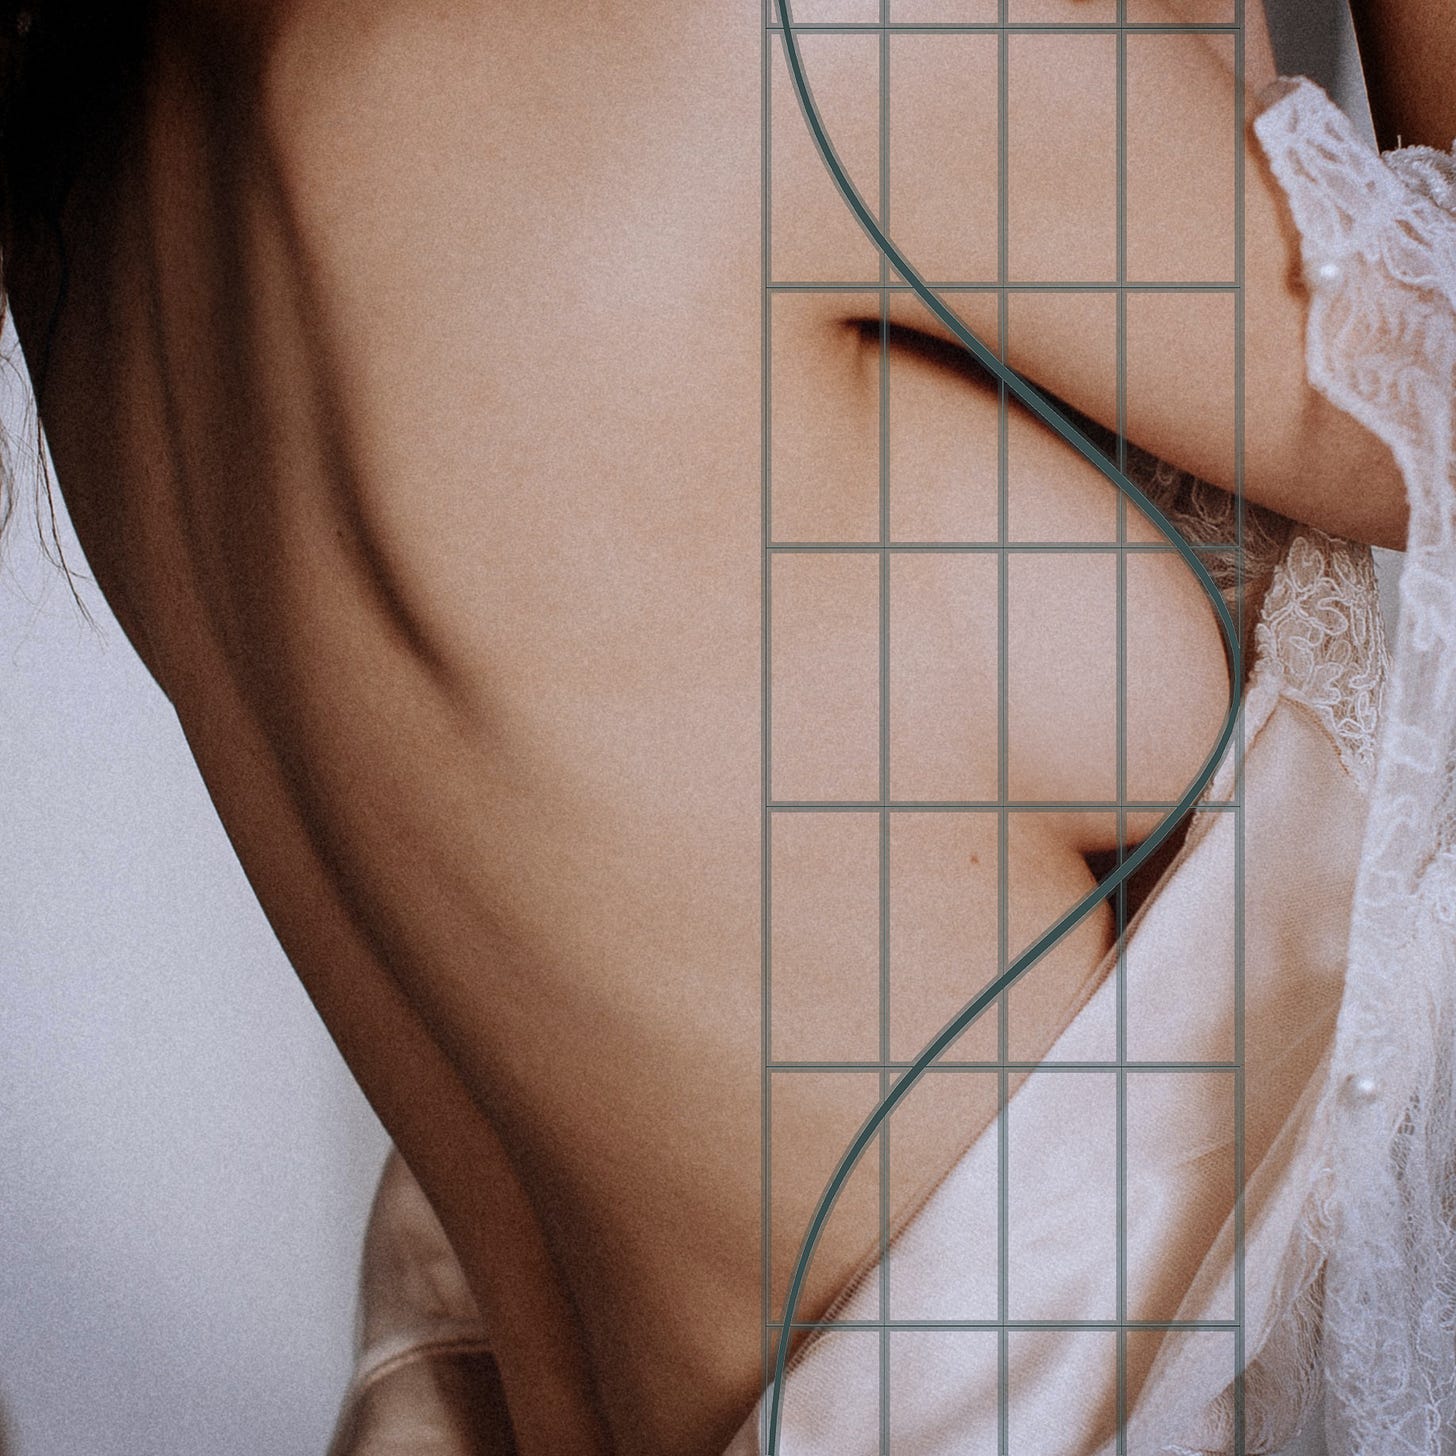 A woman standing in profile and undressing, with a normal distribution line graph superimposed so that the crest falls on her right breast.